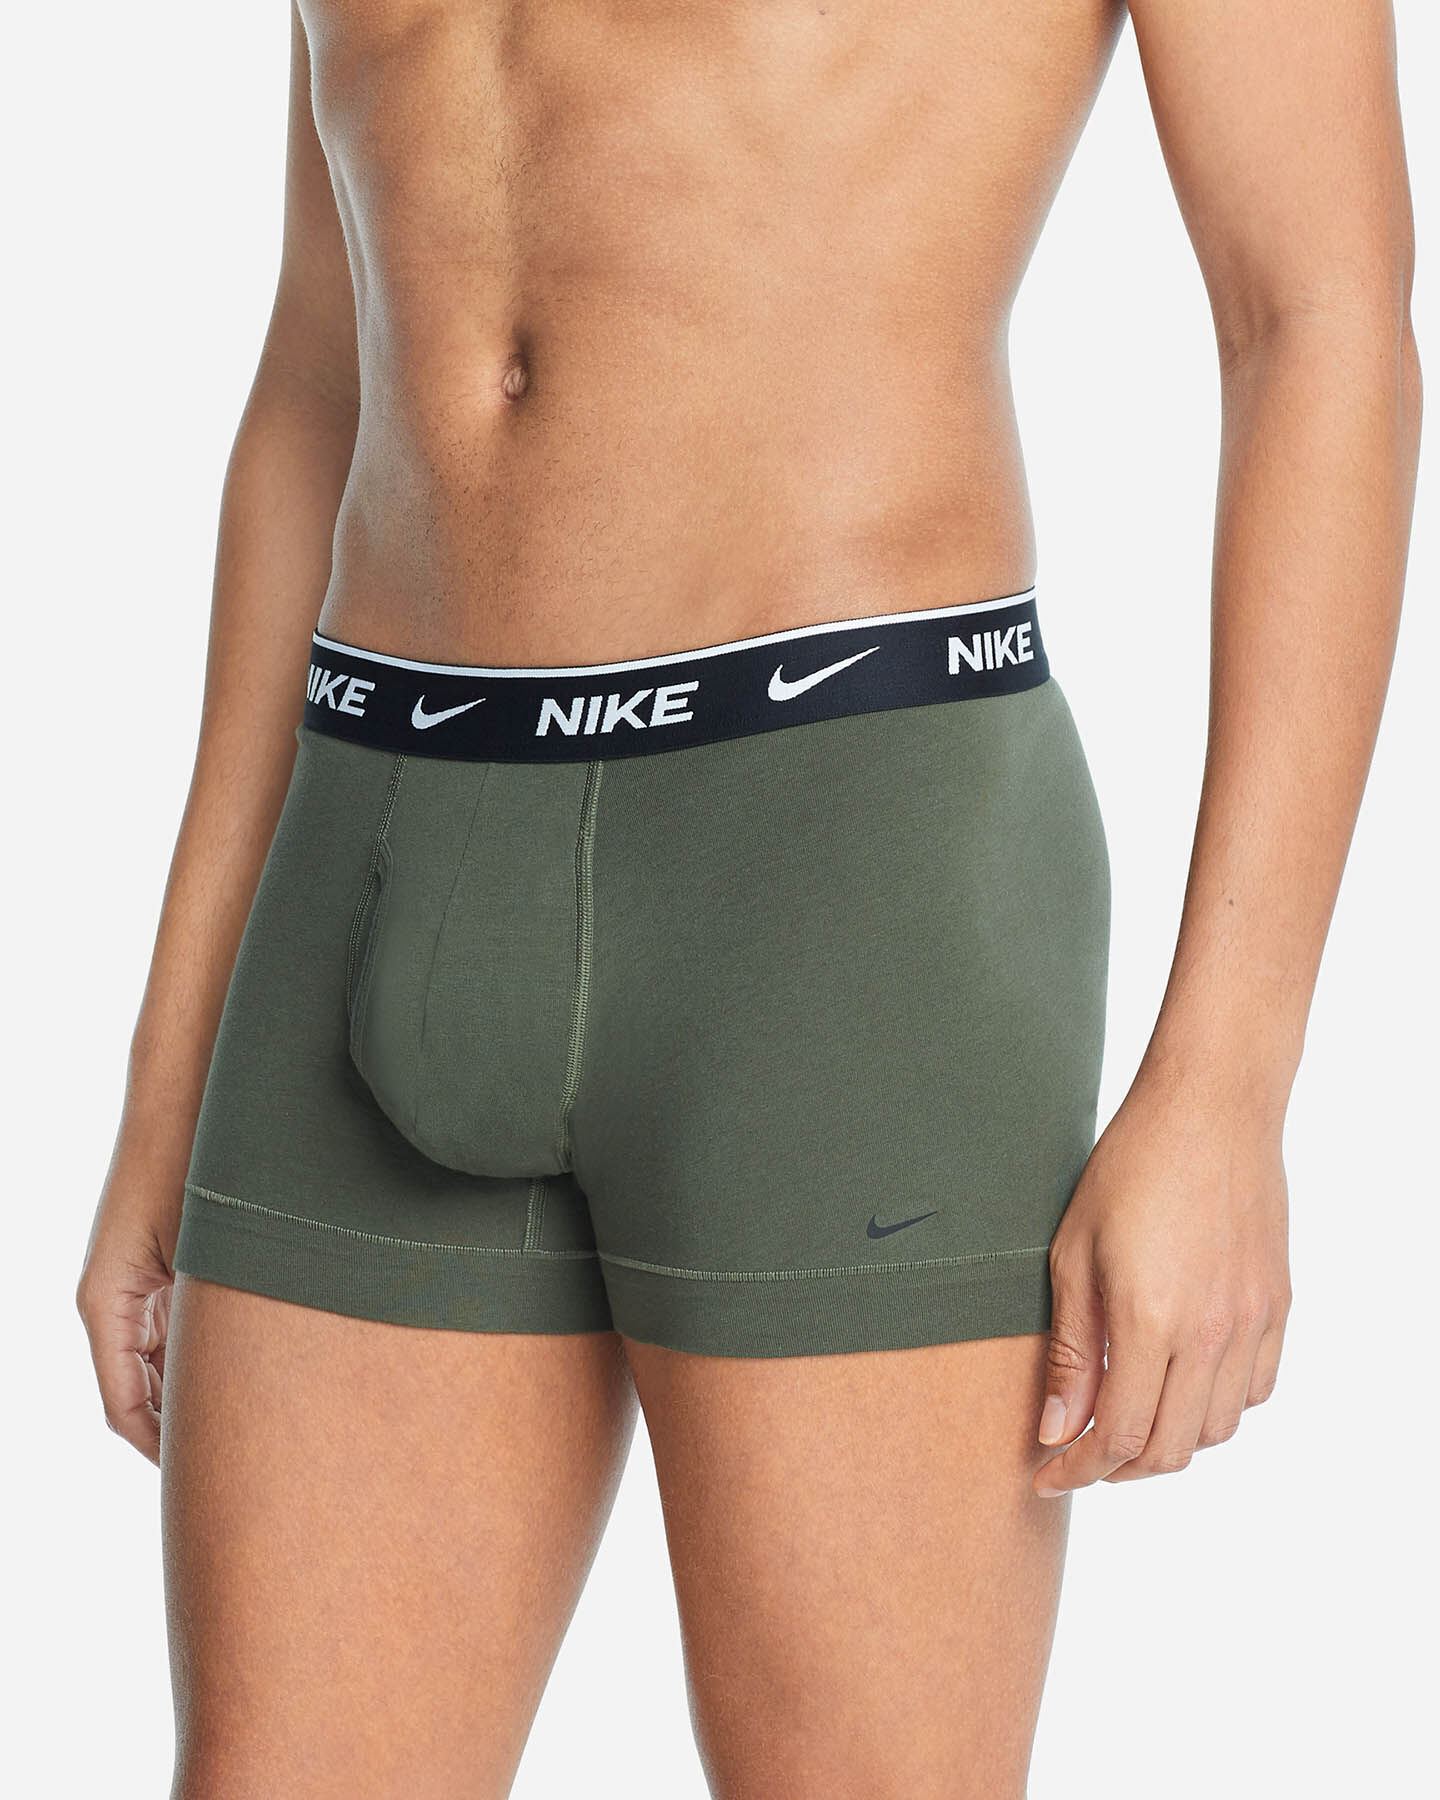  Intimo NIKE 2PACK BOXER EVERYDAY M S4099898|KUY|L scatto 2